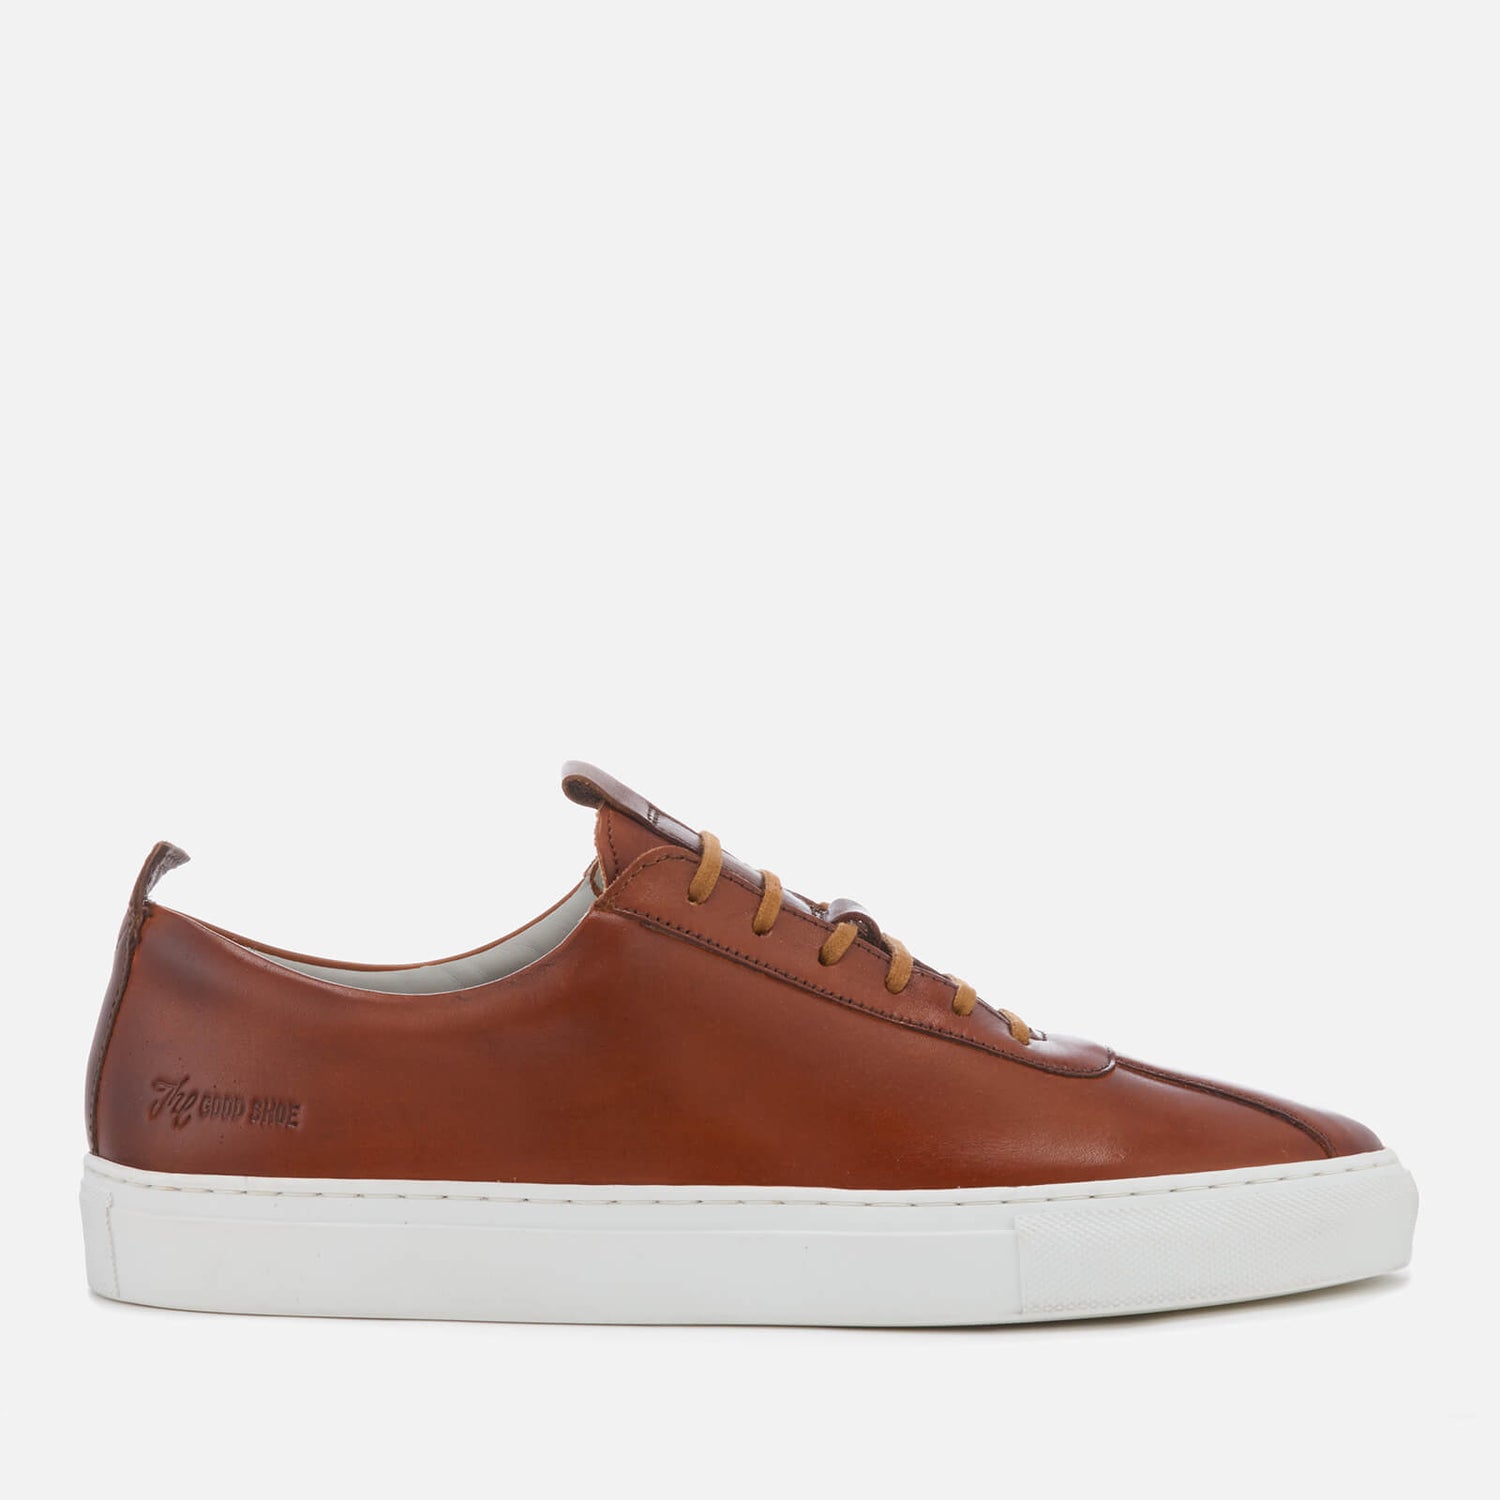 Grenson Men's Sneaker 1 Hand Painted Leather Cupsole Trainers - Tan